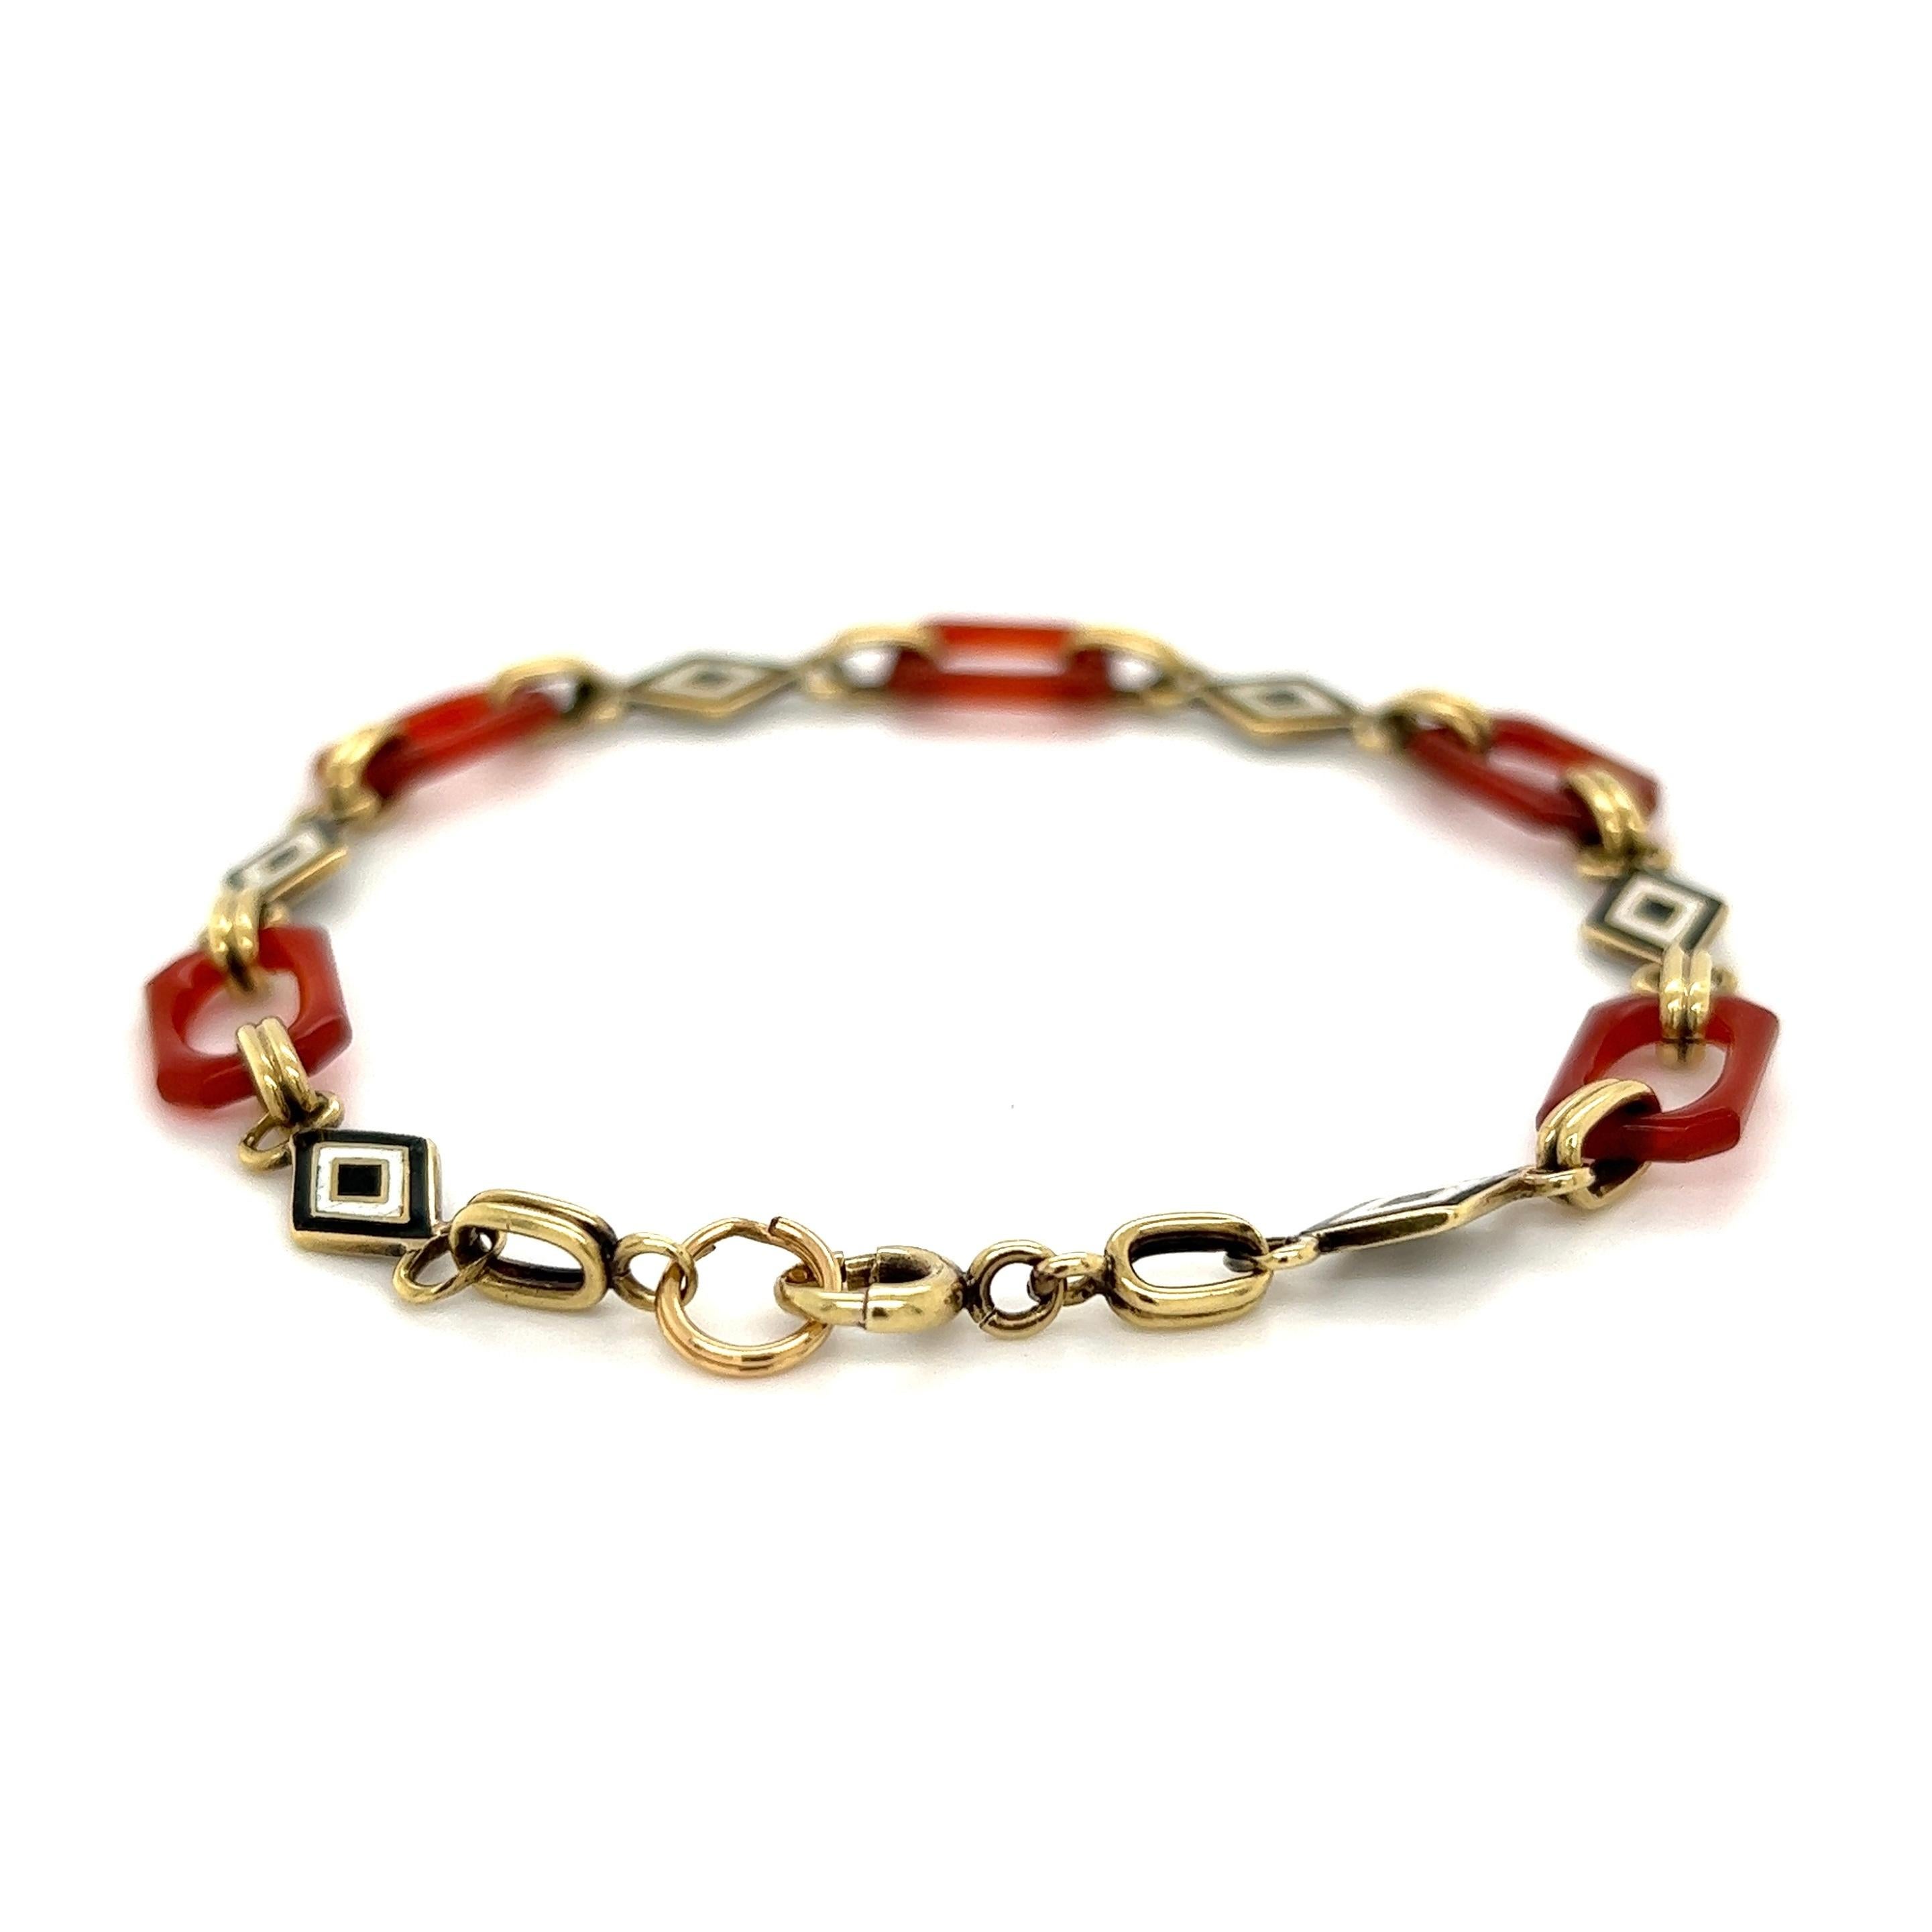 Enamel and Carnelian Art Deco Revival Gold Link Bracelet In Excellent Condition For Sale In Montreal, QC